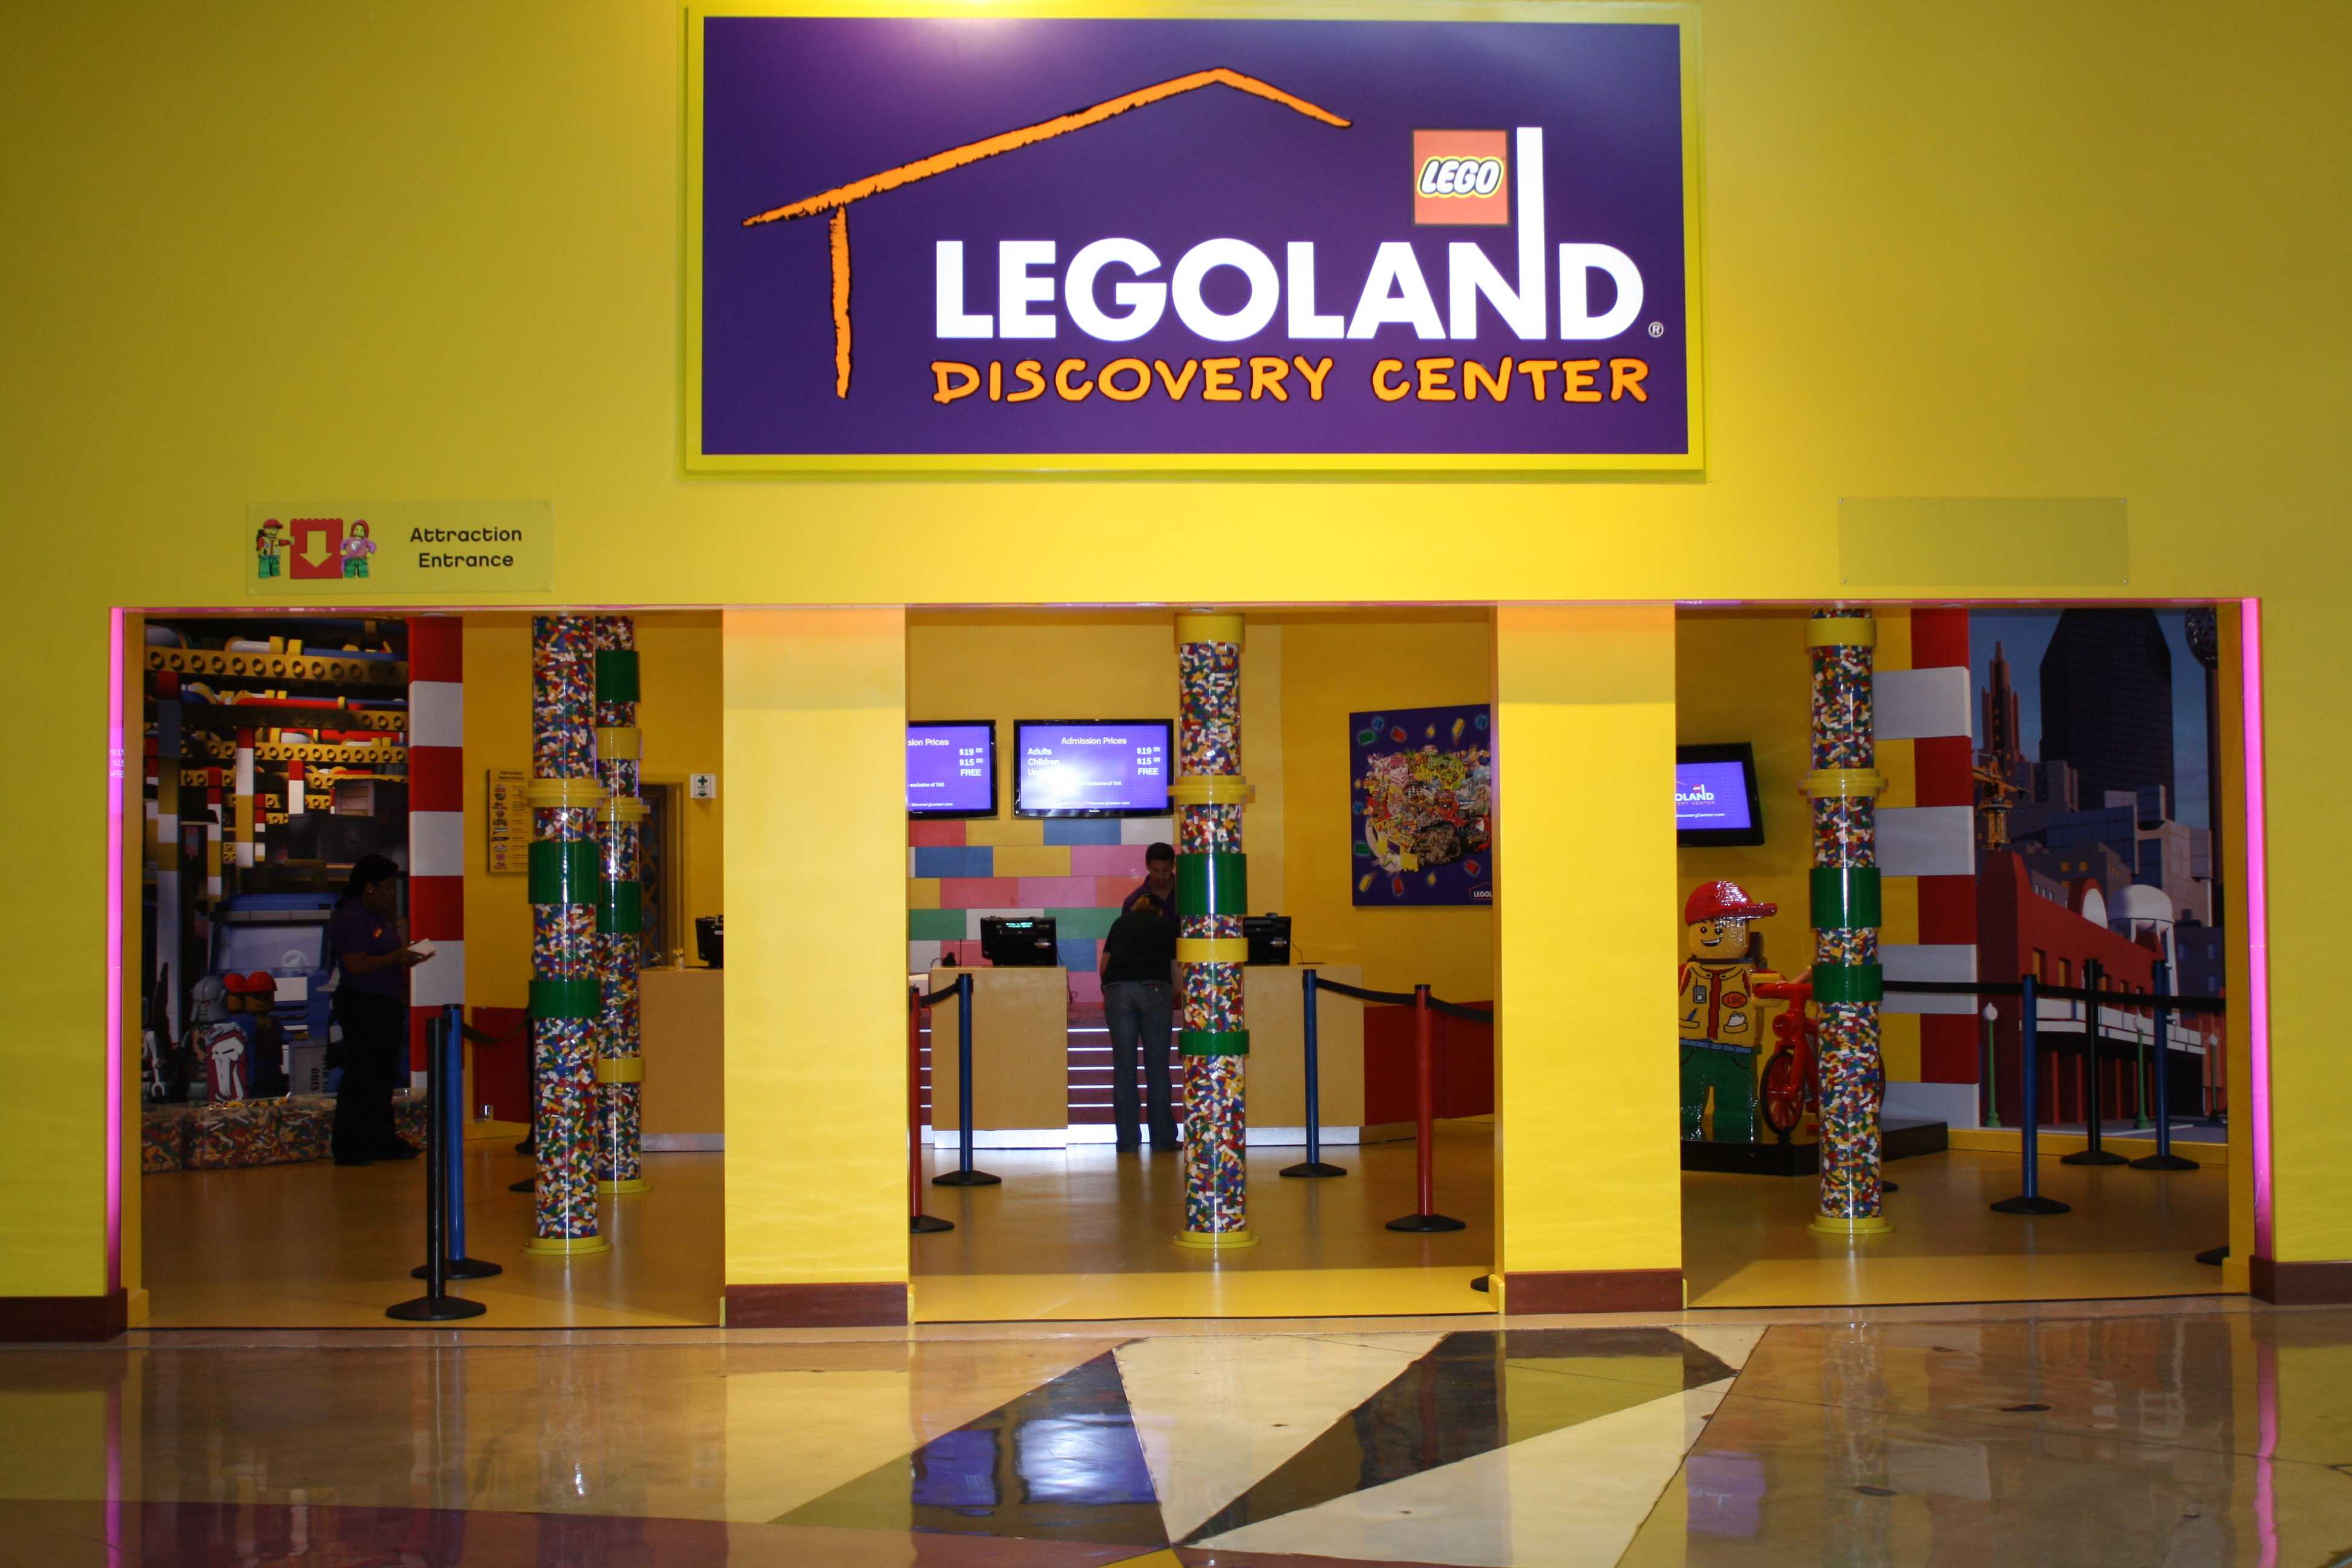 Coppell Student Media : LEGOLAND builds new attraction for ...